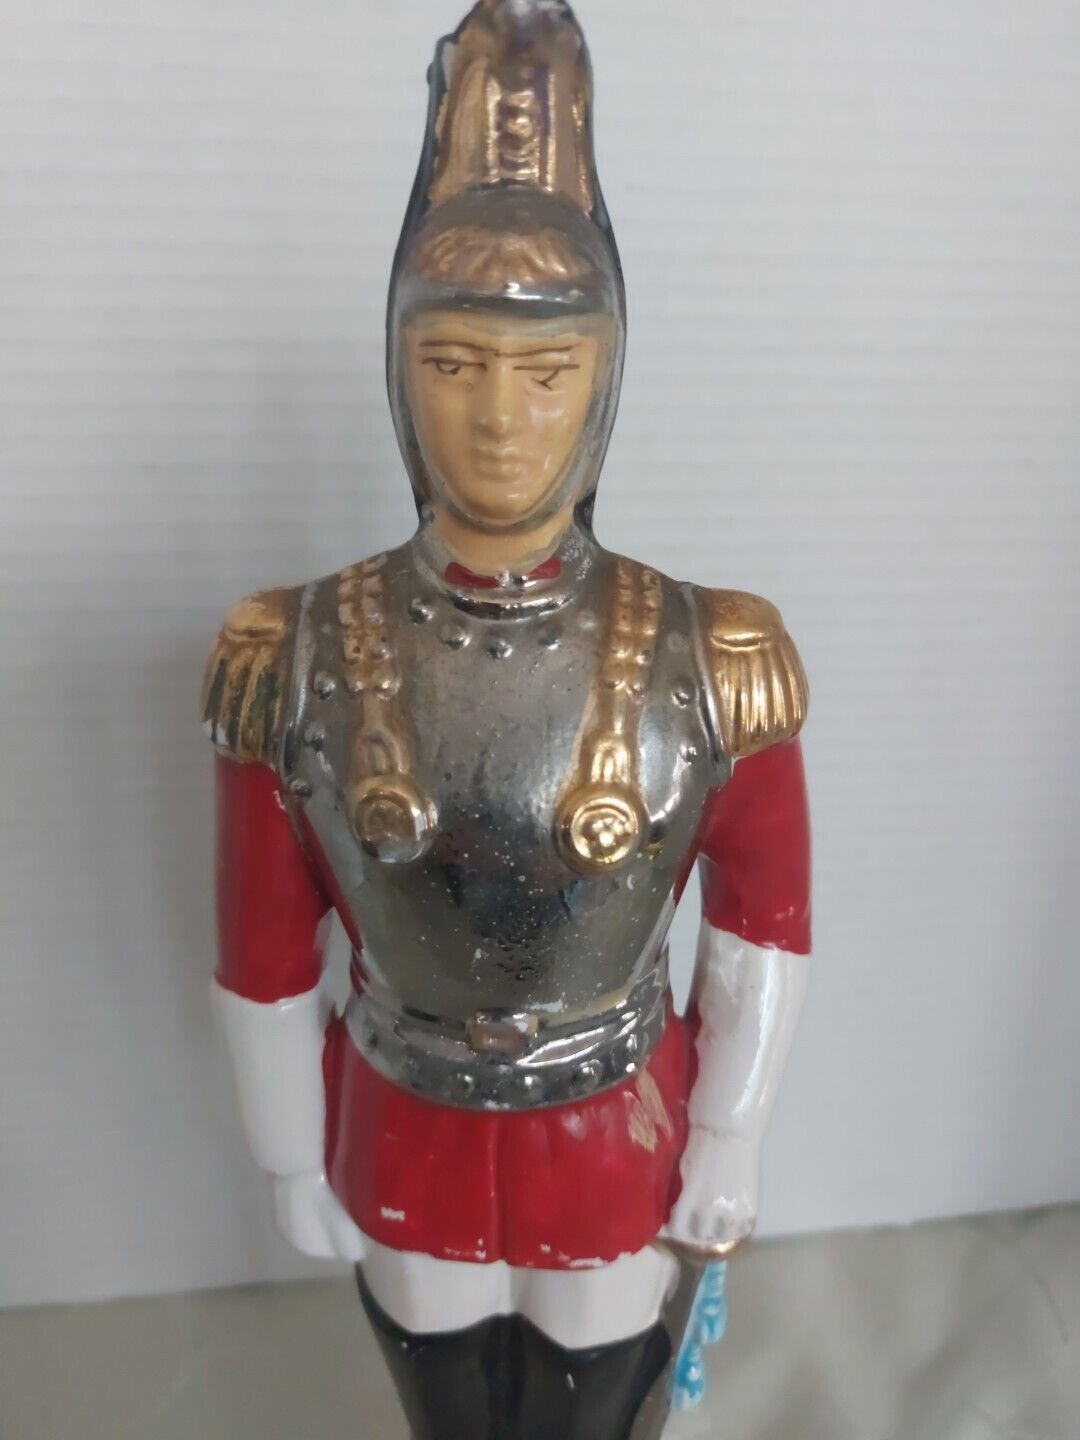 Vntage Sicilian Gold BOTTLE Italian Royal Guard Soldier Italy 1Ft.1\